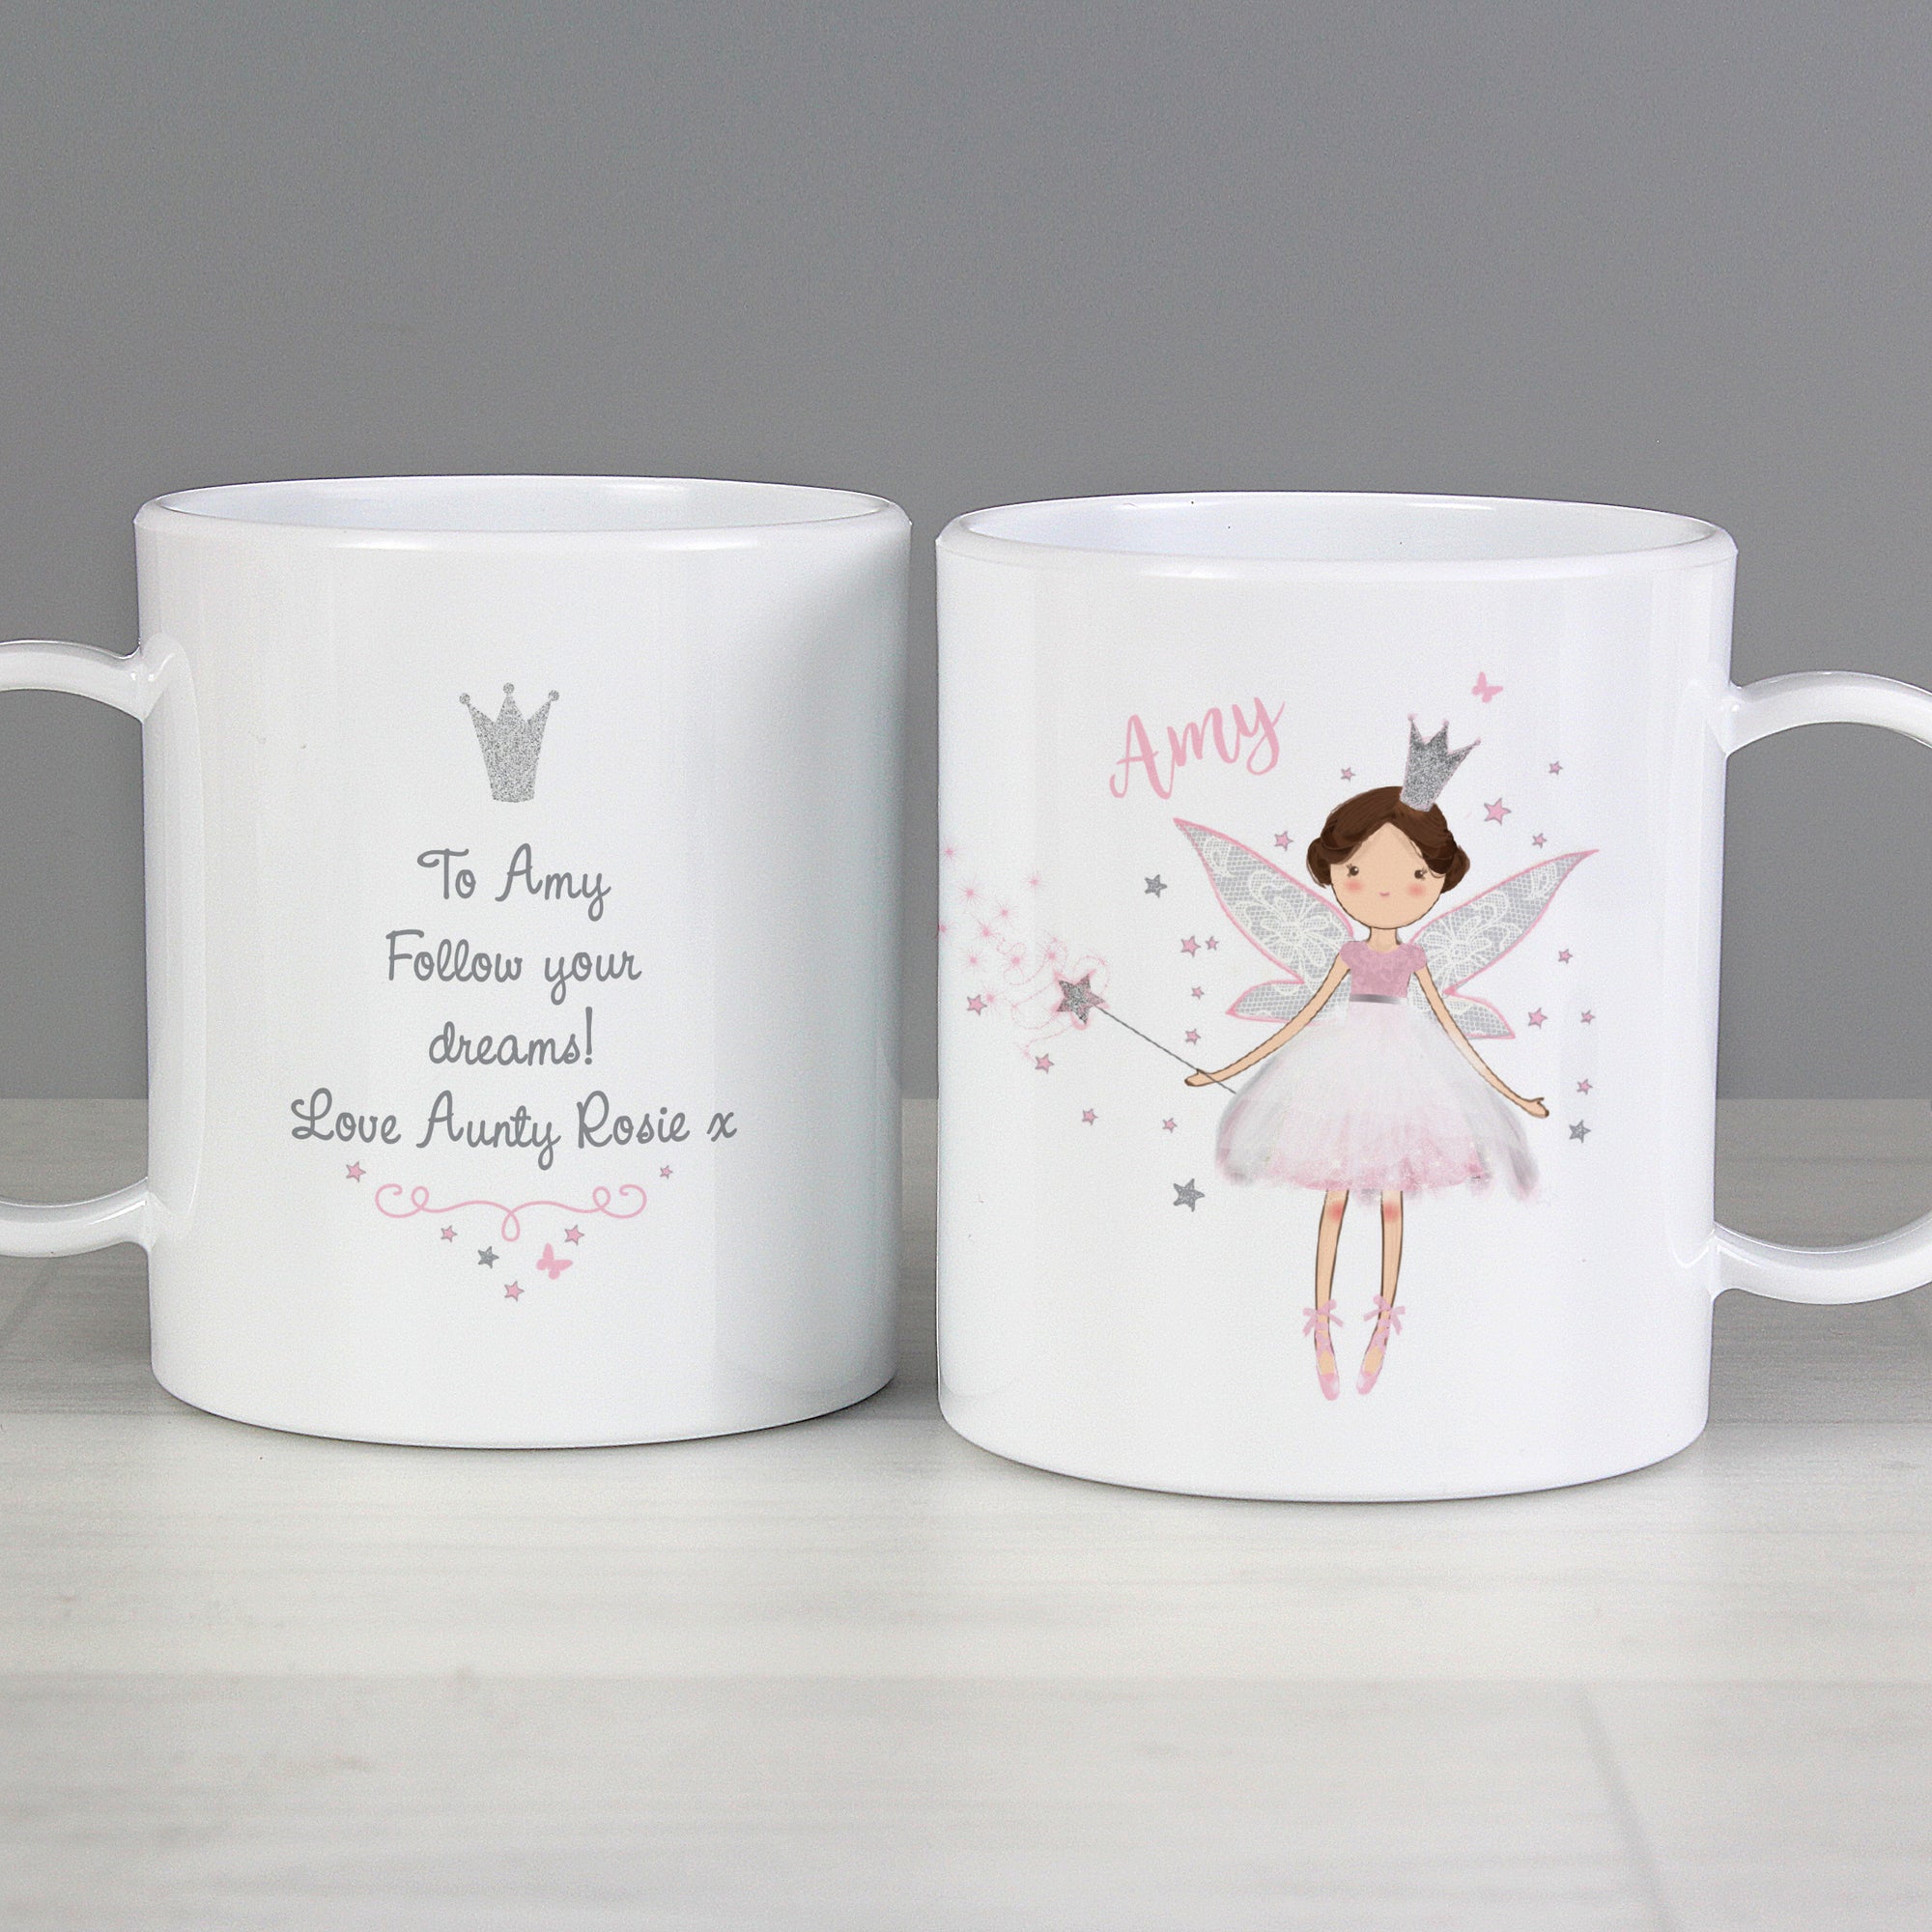 Image of a plastic BPA free childs personalised cup. The cup is white and has an image of a fairy at the front wearing a pink dress and with a silver crown and holding a wand. The plate can be personalised with a name of your choice which will be printed just above the fairy on the left side in a pink cursive font.  The back of the cup features a silver glitter crown and beneath it you can add your own message over 4 lines which will be printed in a delicate black font.